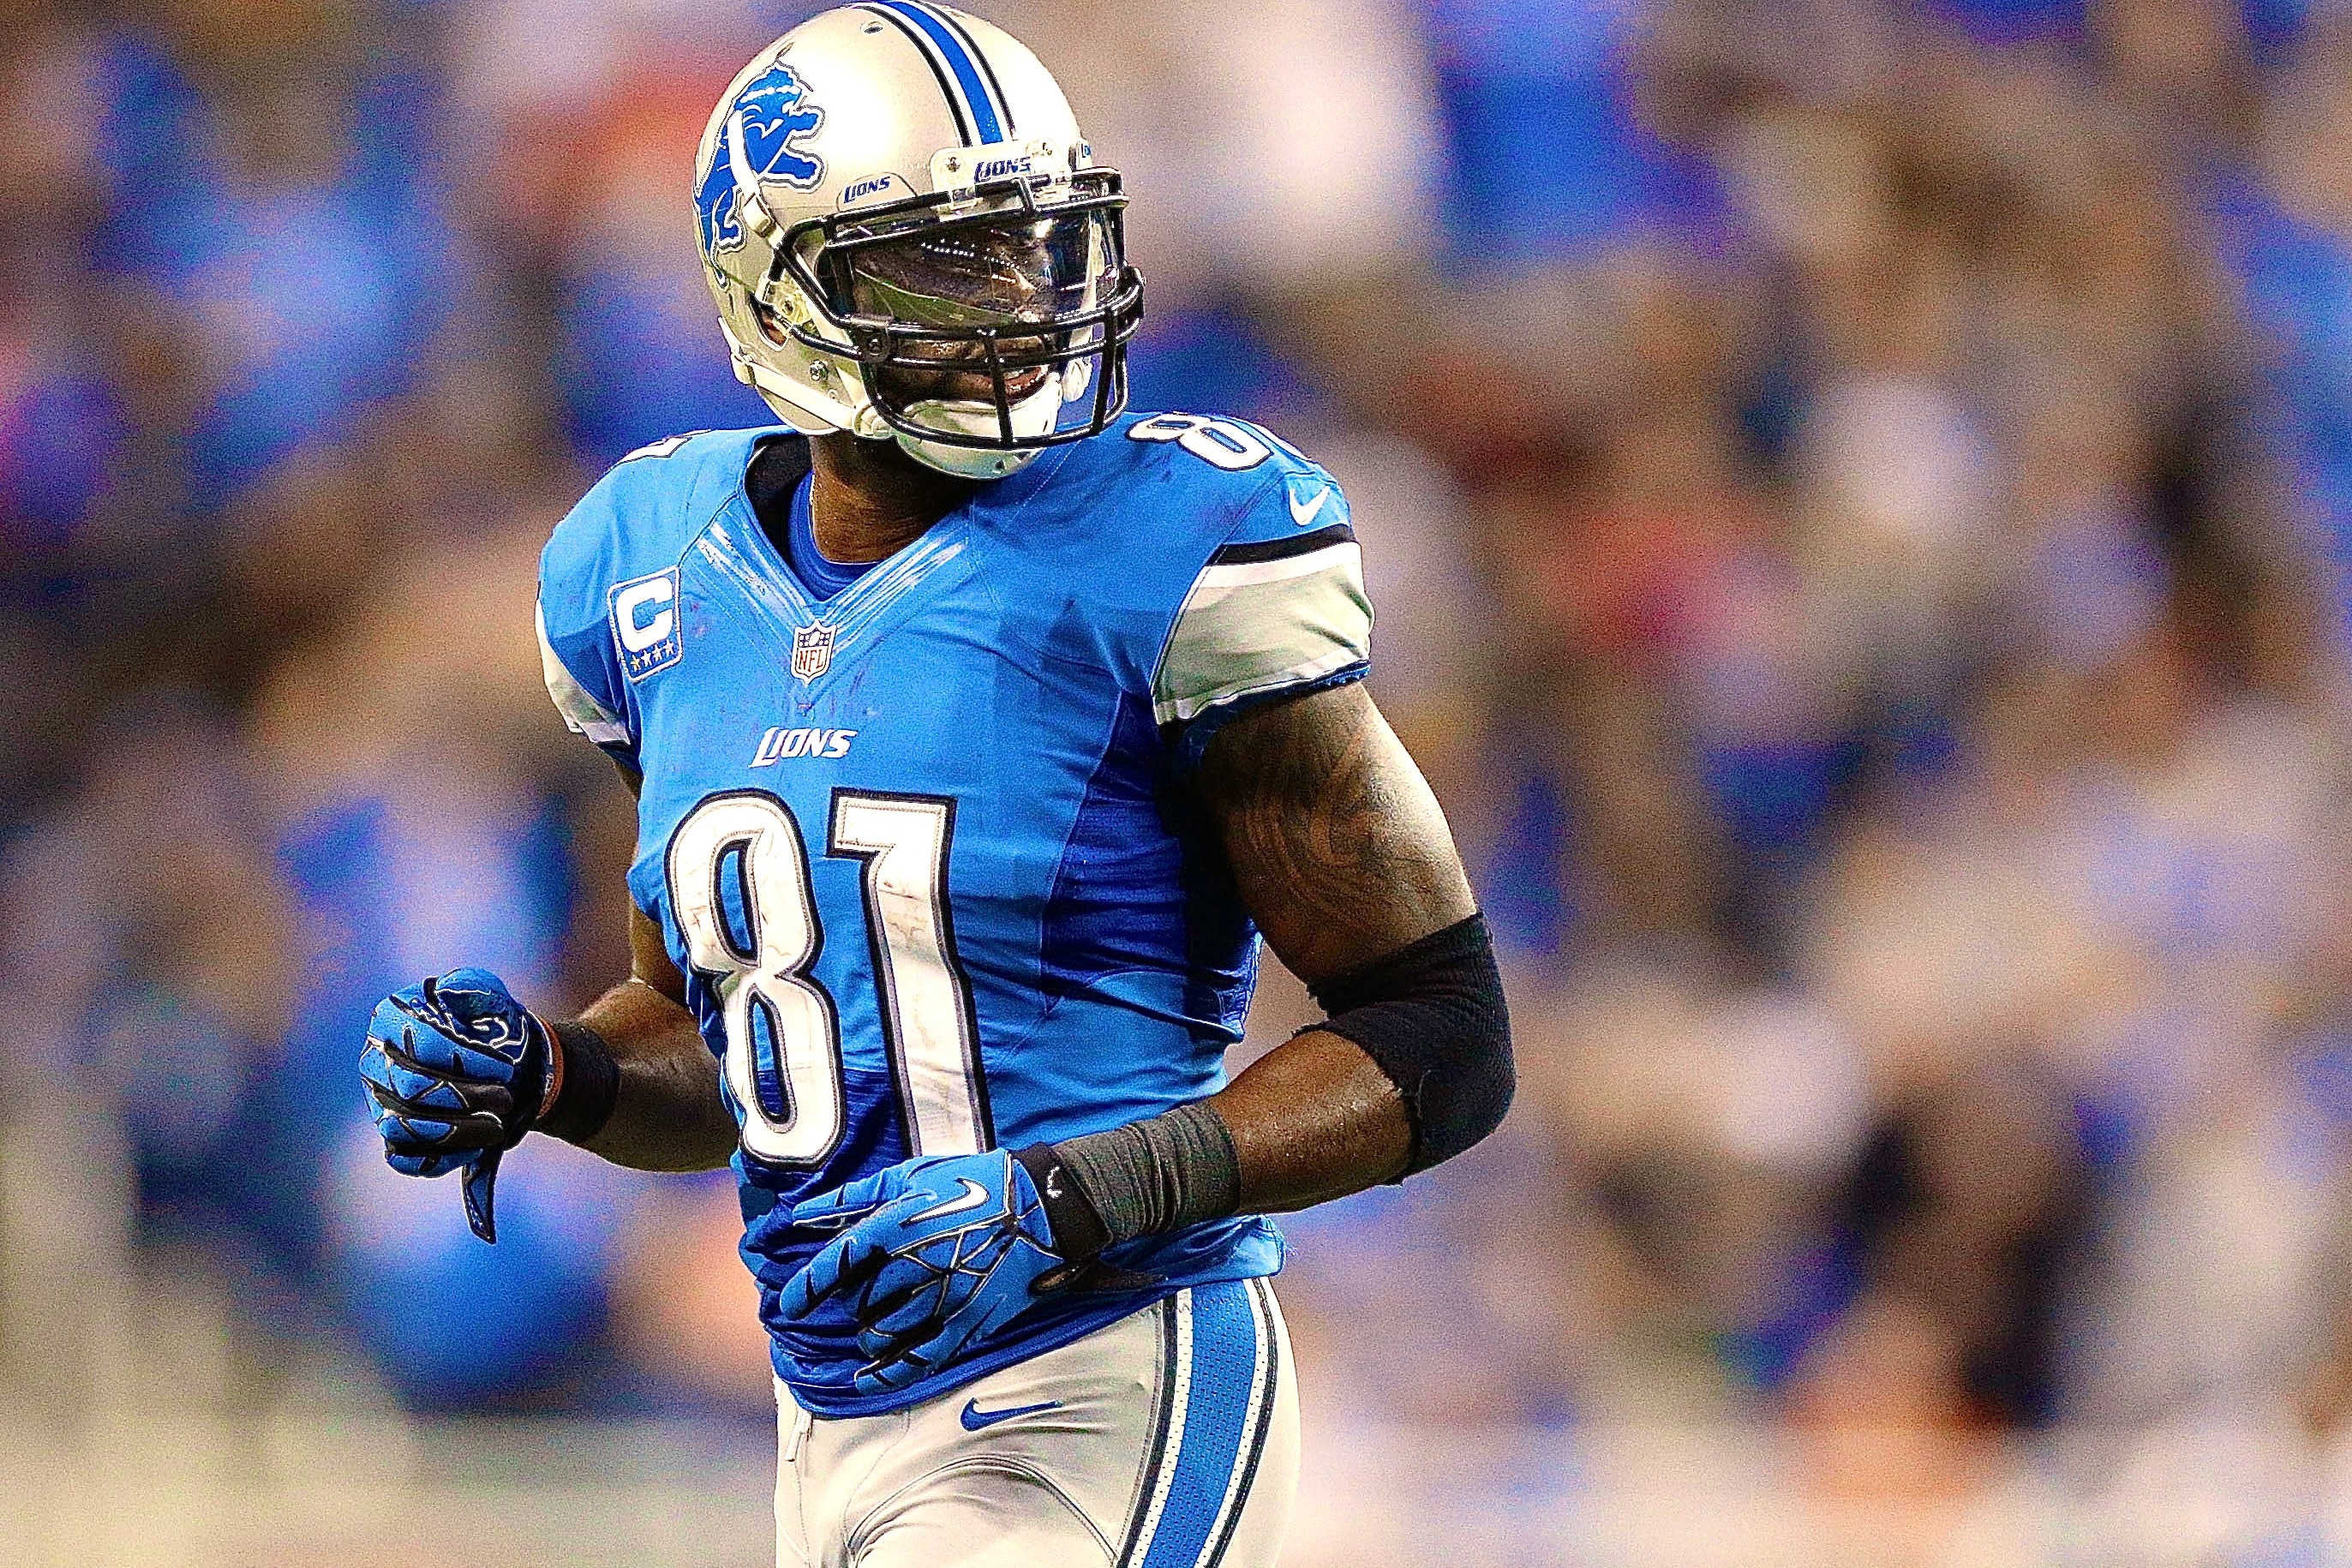 Detroit Lions: Calvin Johnson says he has some good years left